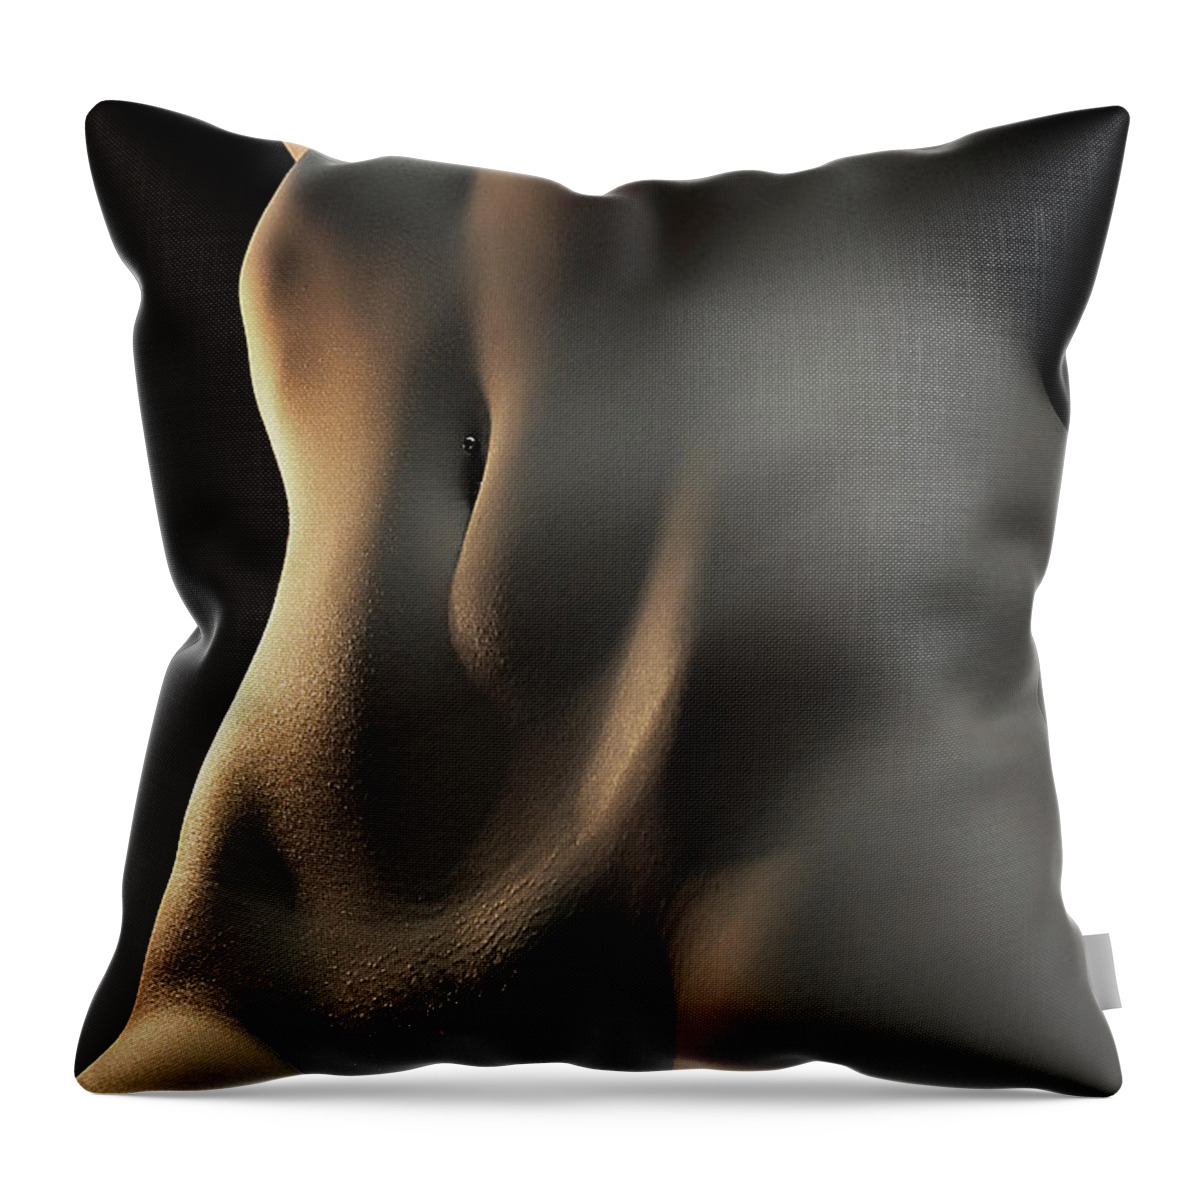 Artistic Throw Pillow featuring the photograph Brilliant Smile by Robert WK Clark